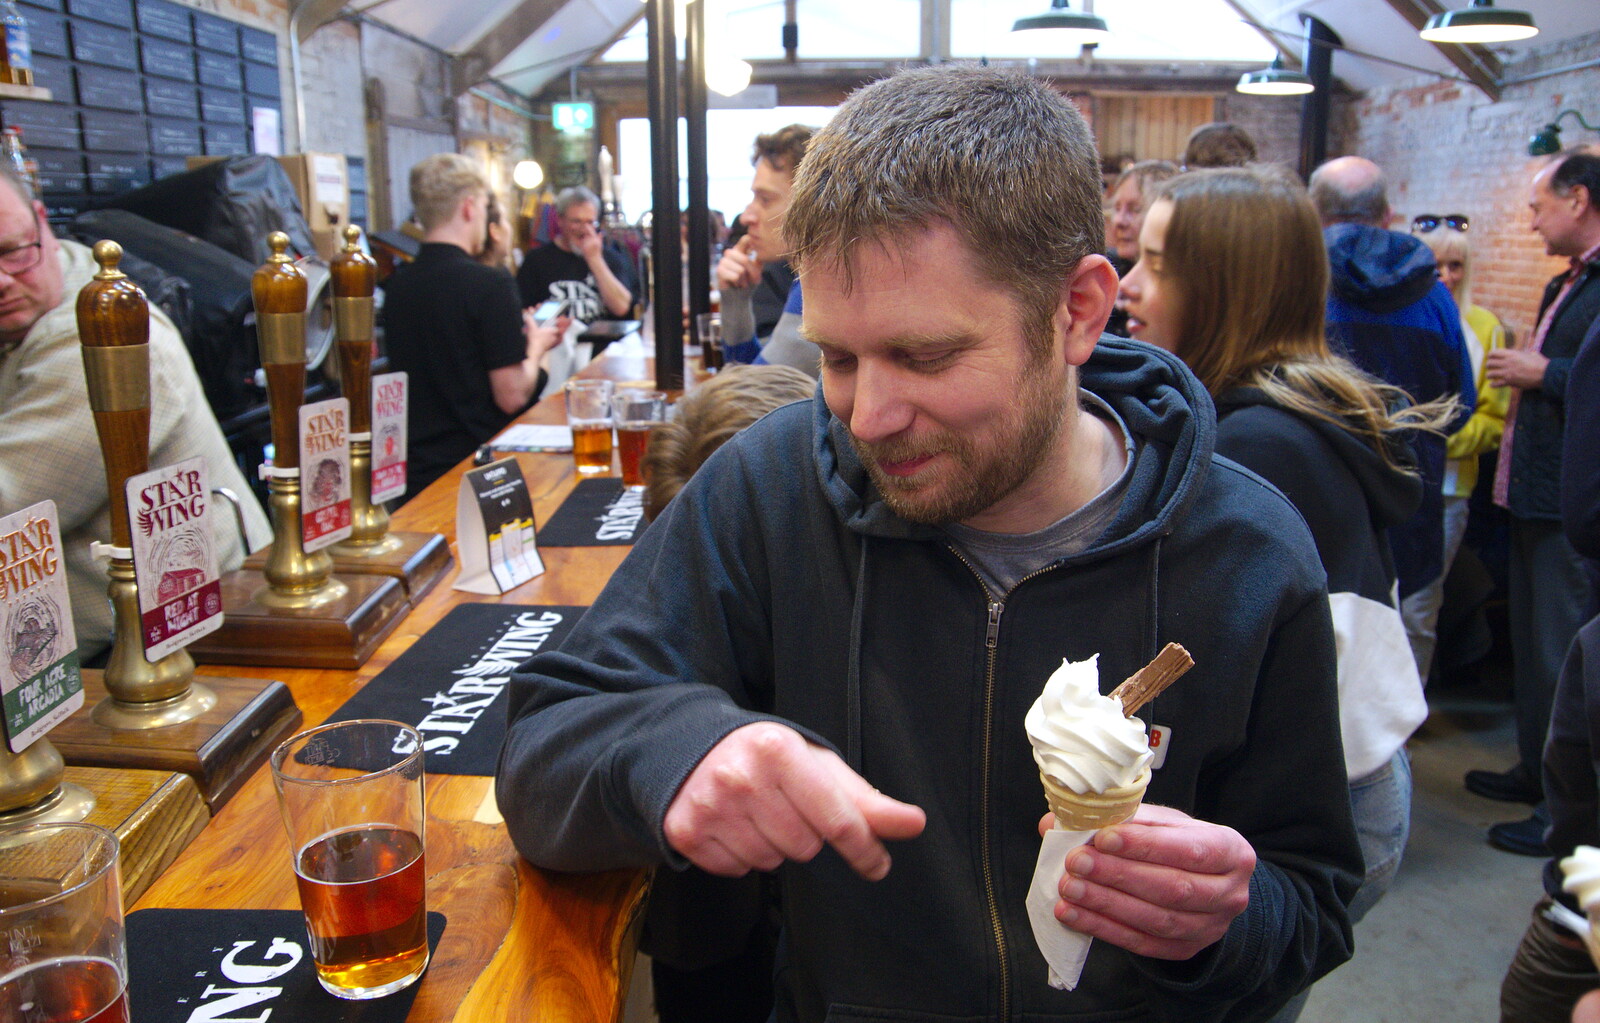 Phil at the bar, with ice cream from The Opening of Star Wing Brewery's Tap Room, Redgrave, Suffolk - 4th May 2019